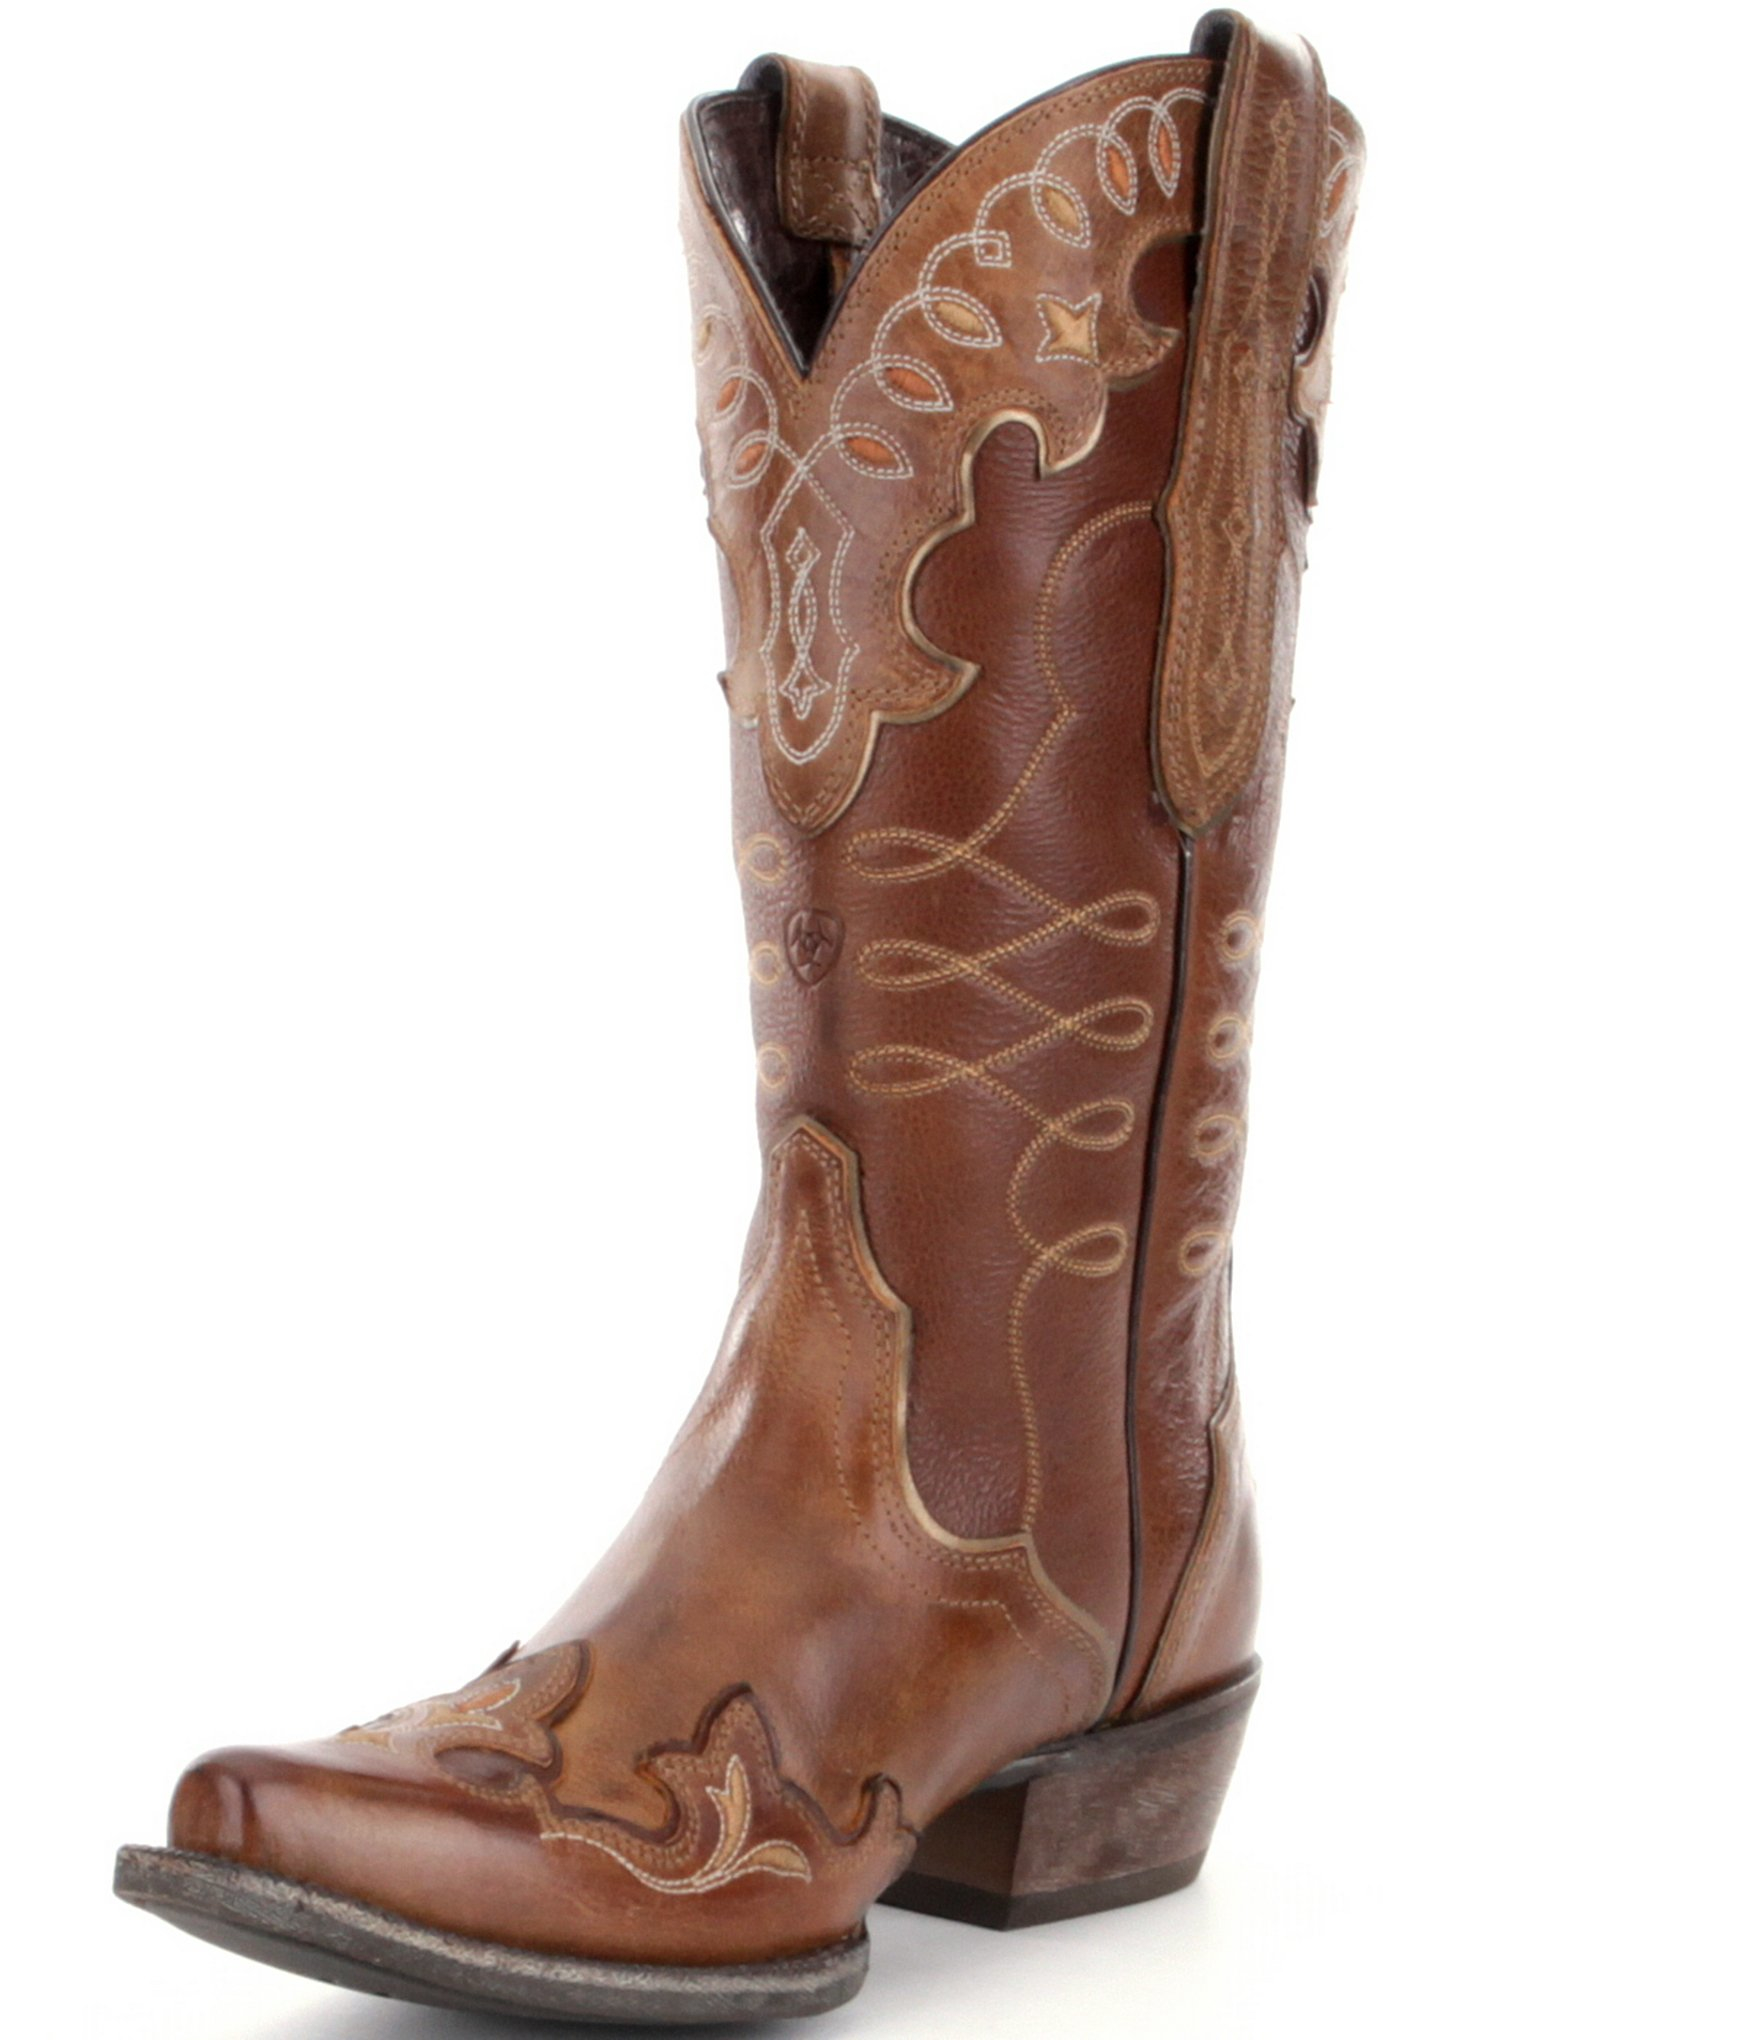 Ariat Zealous Leather Wingtip Boots in Brown - Lyst